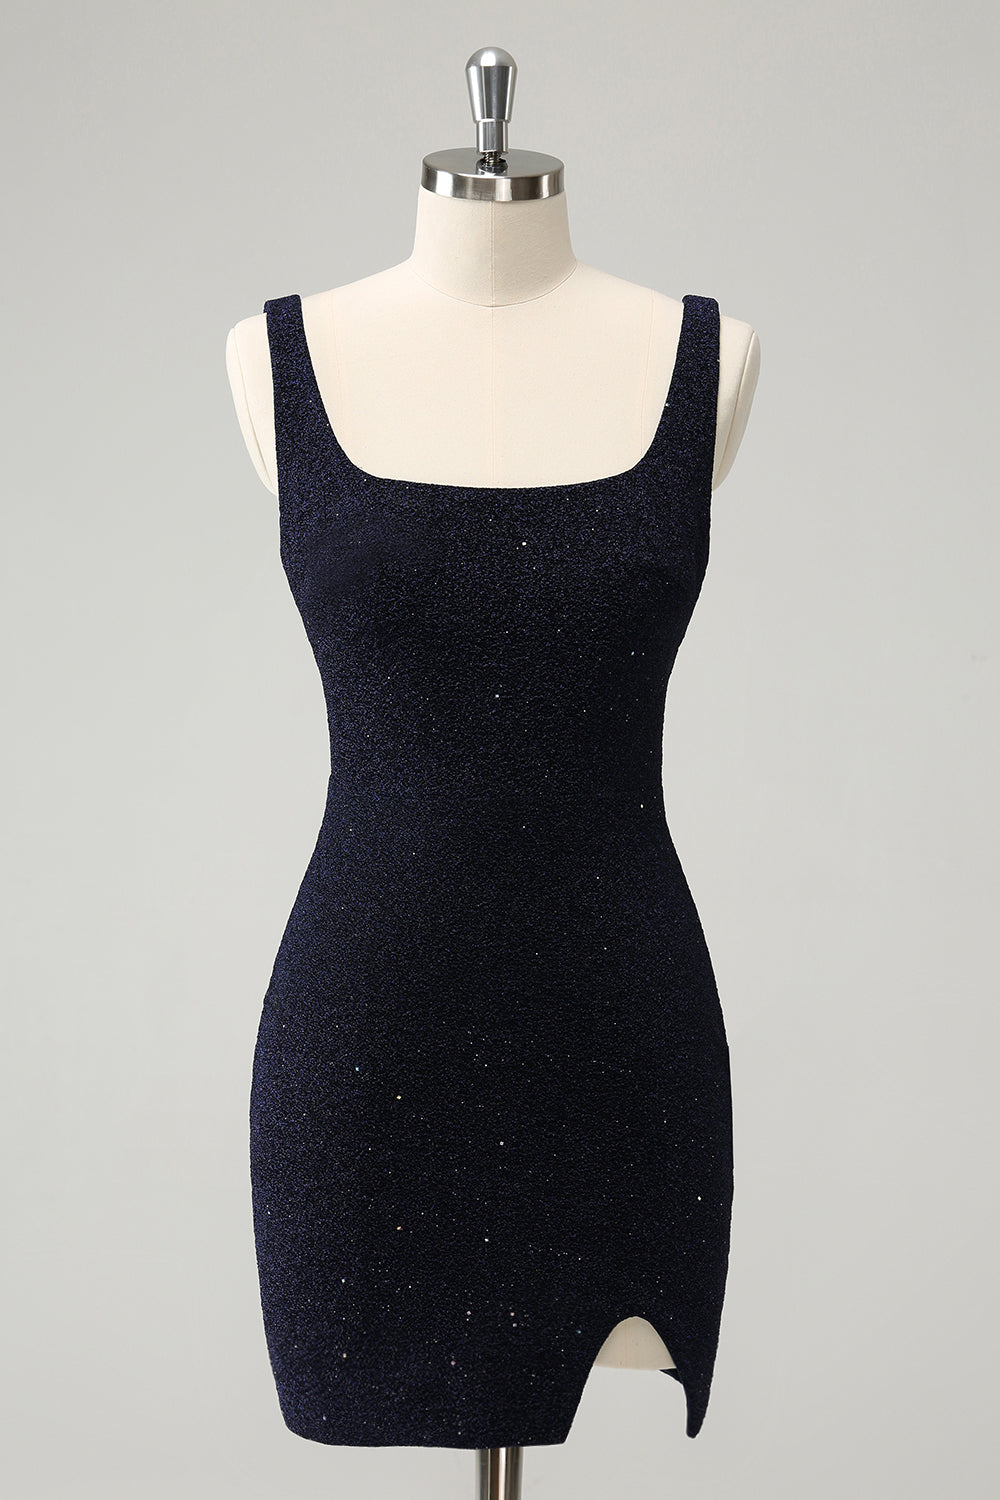 Sparkly Dark Blue Square Neck Bodycon Mini Homecoming Dress With Slit